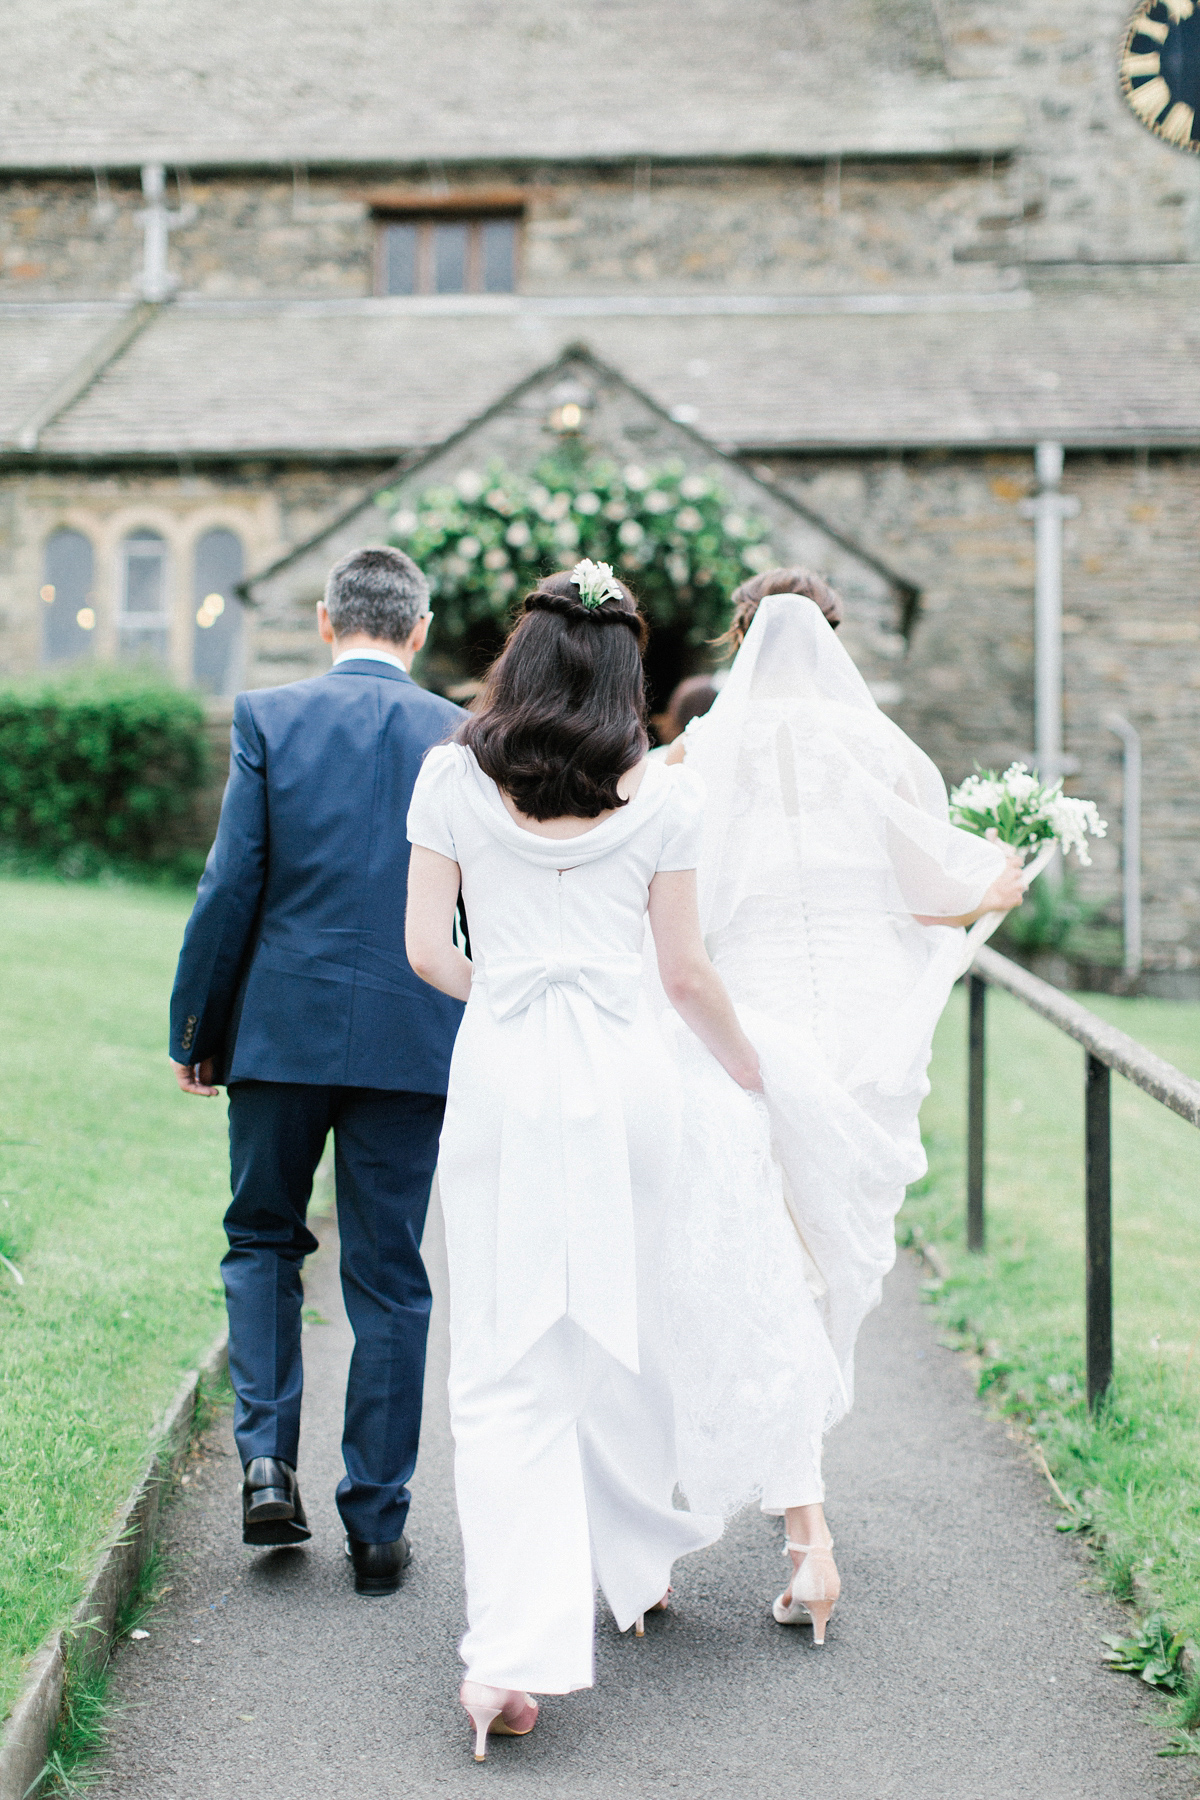 A Spring time wedding in the Lake District inspired by fairies. Bride Rachel wore a dress, veil and velvet shoes by Le Spose di Gio. Fine art wedding photography by Melissa Beattie.